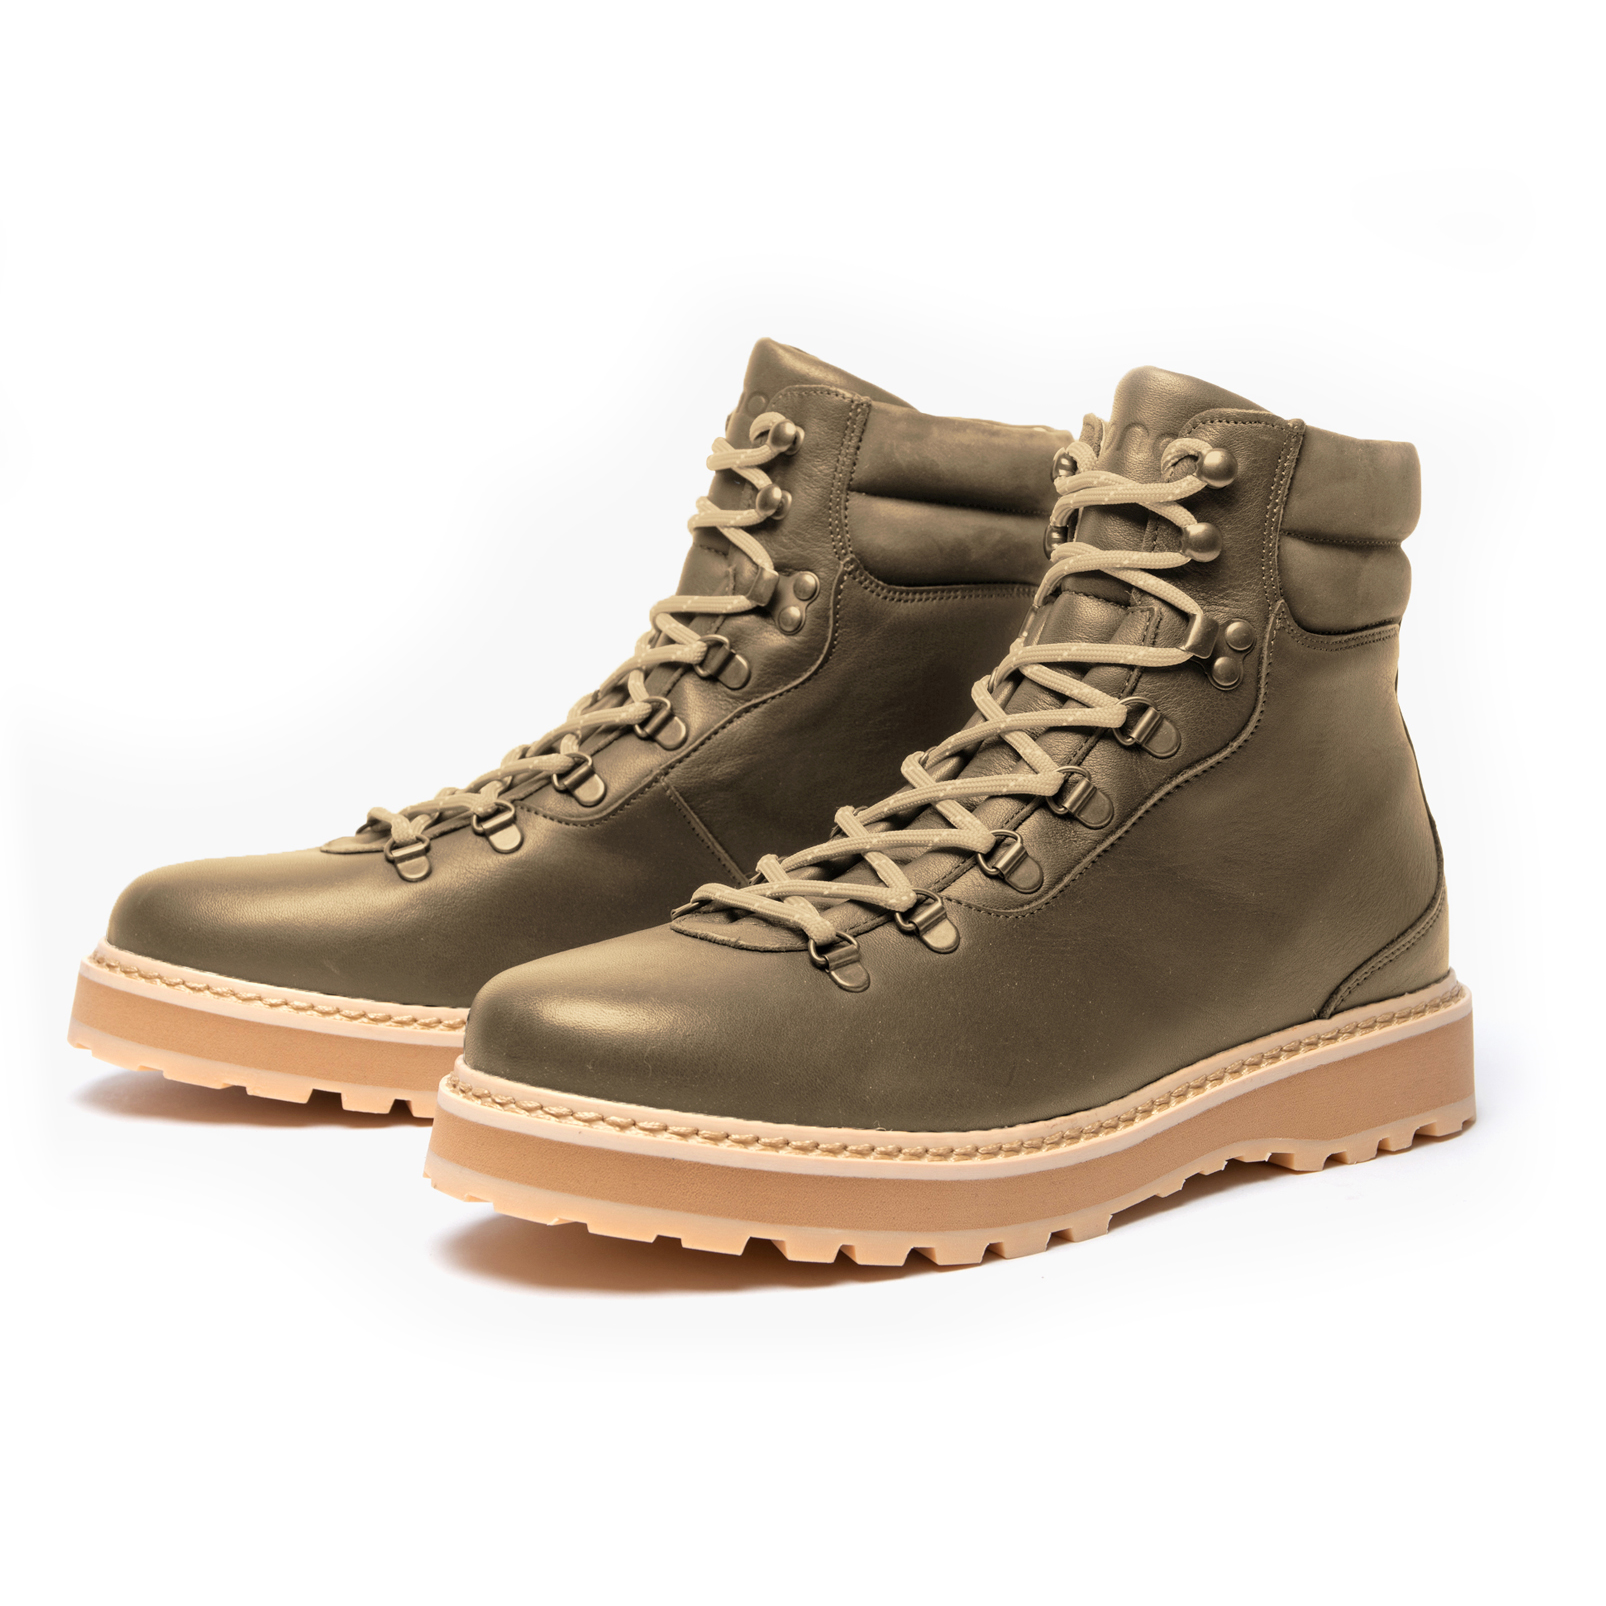 Hiking -  Leather - Shearling Lining - Mens